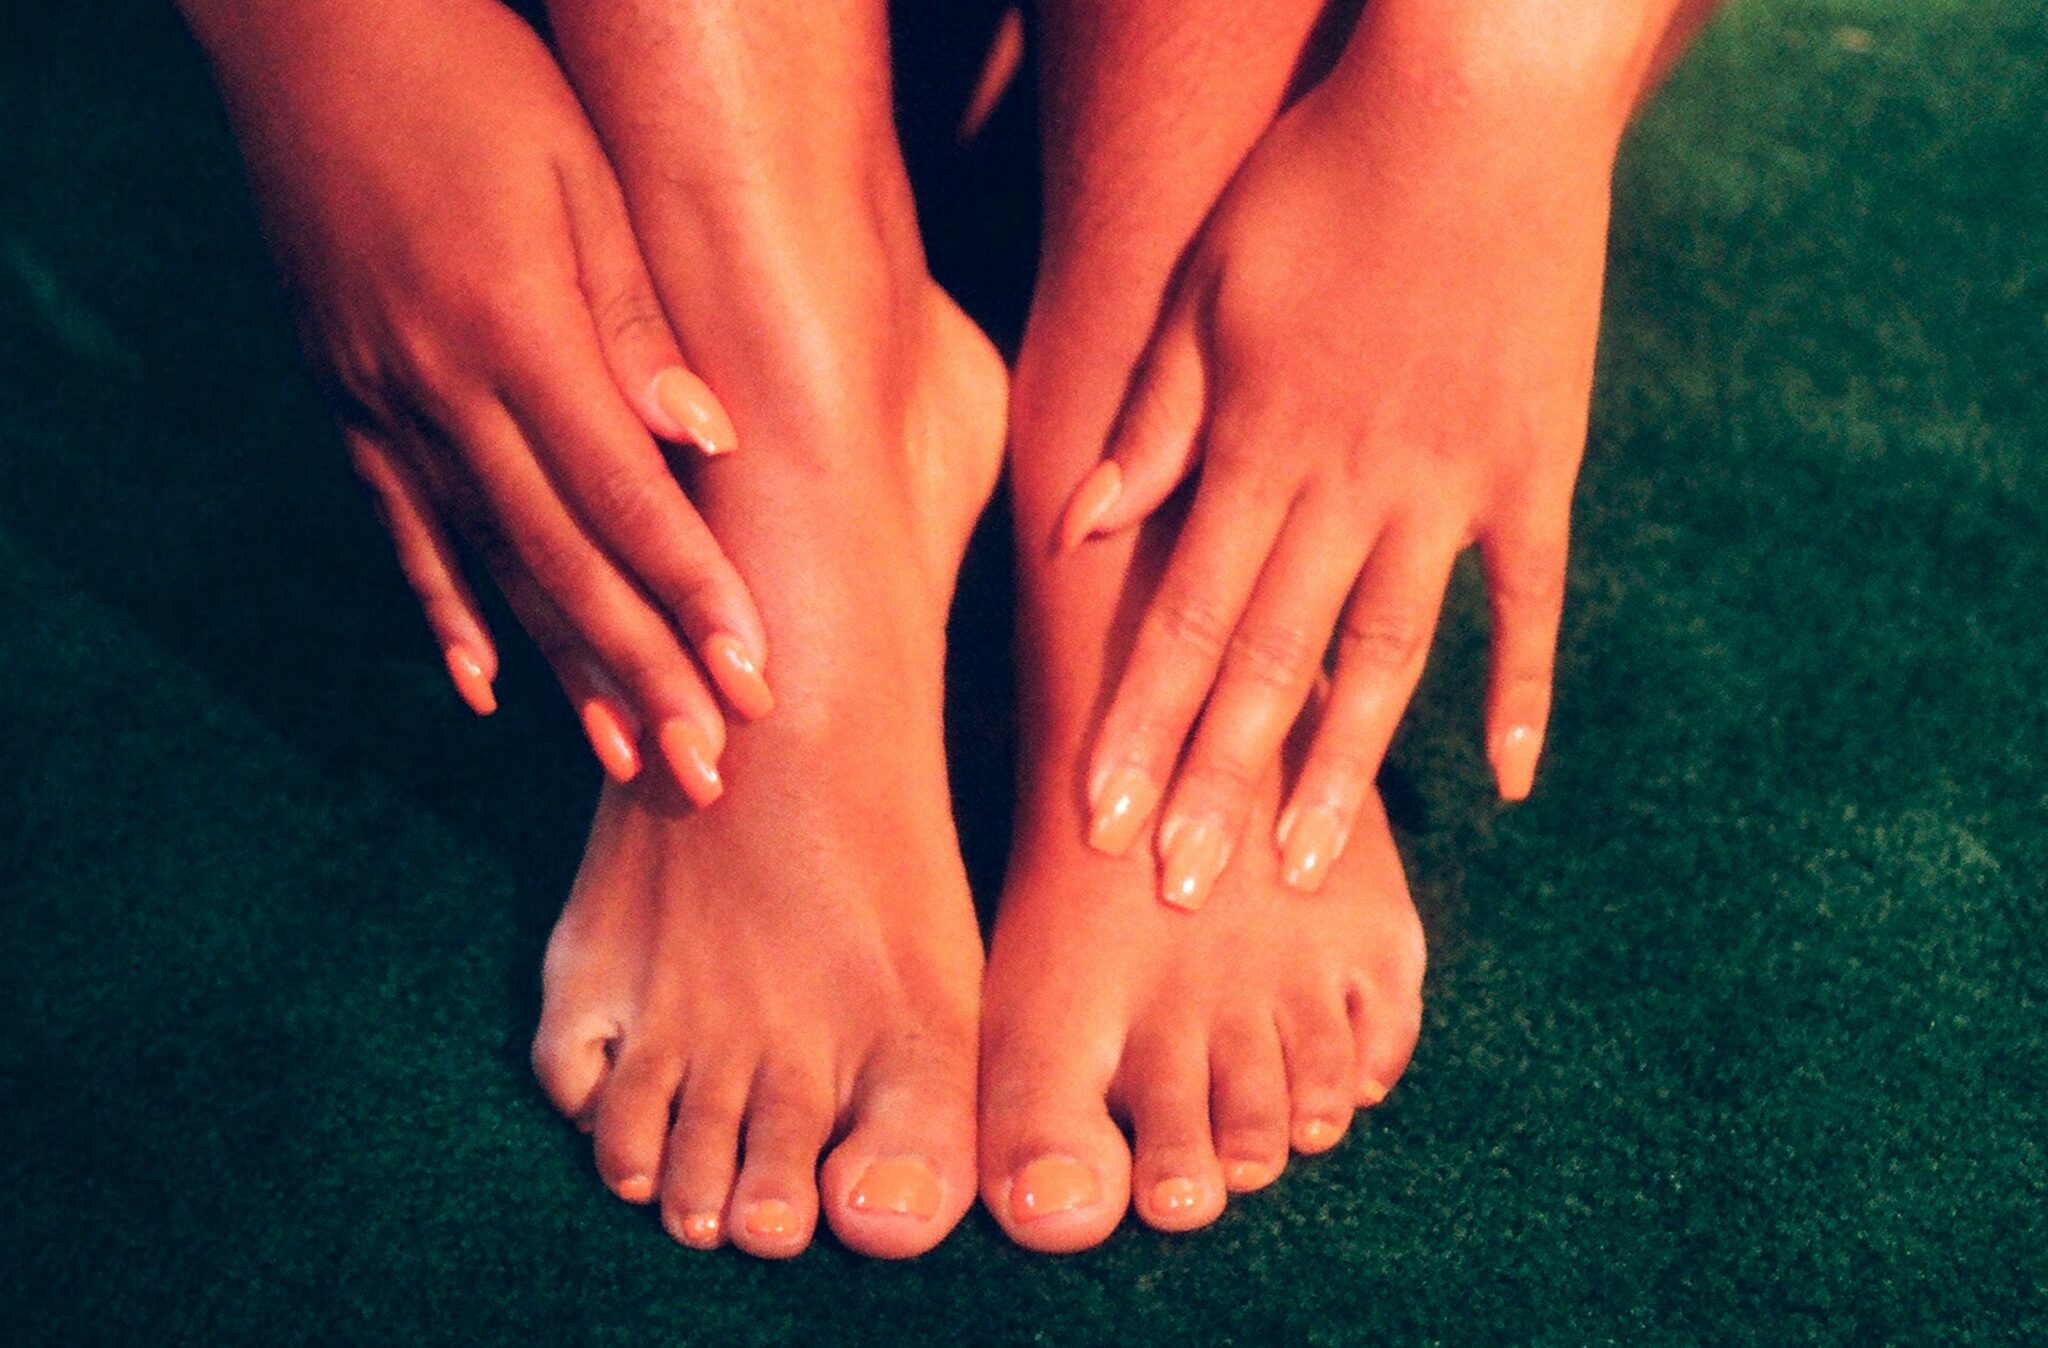 A woman rubbing the tops of her feet with manicured hands.